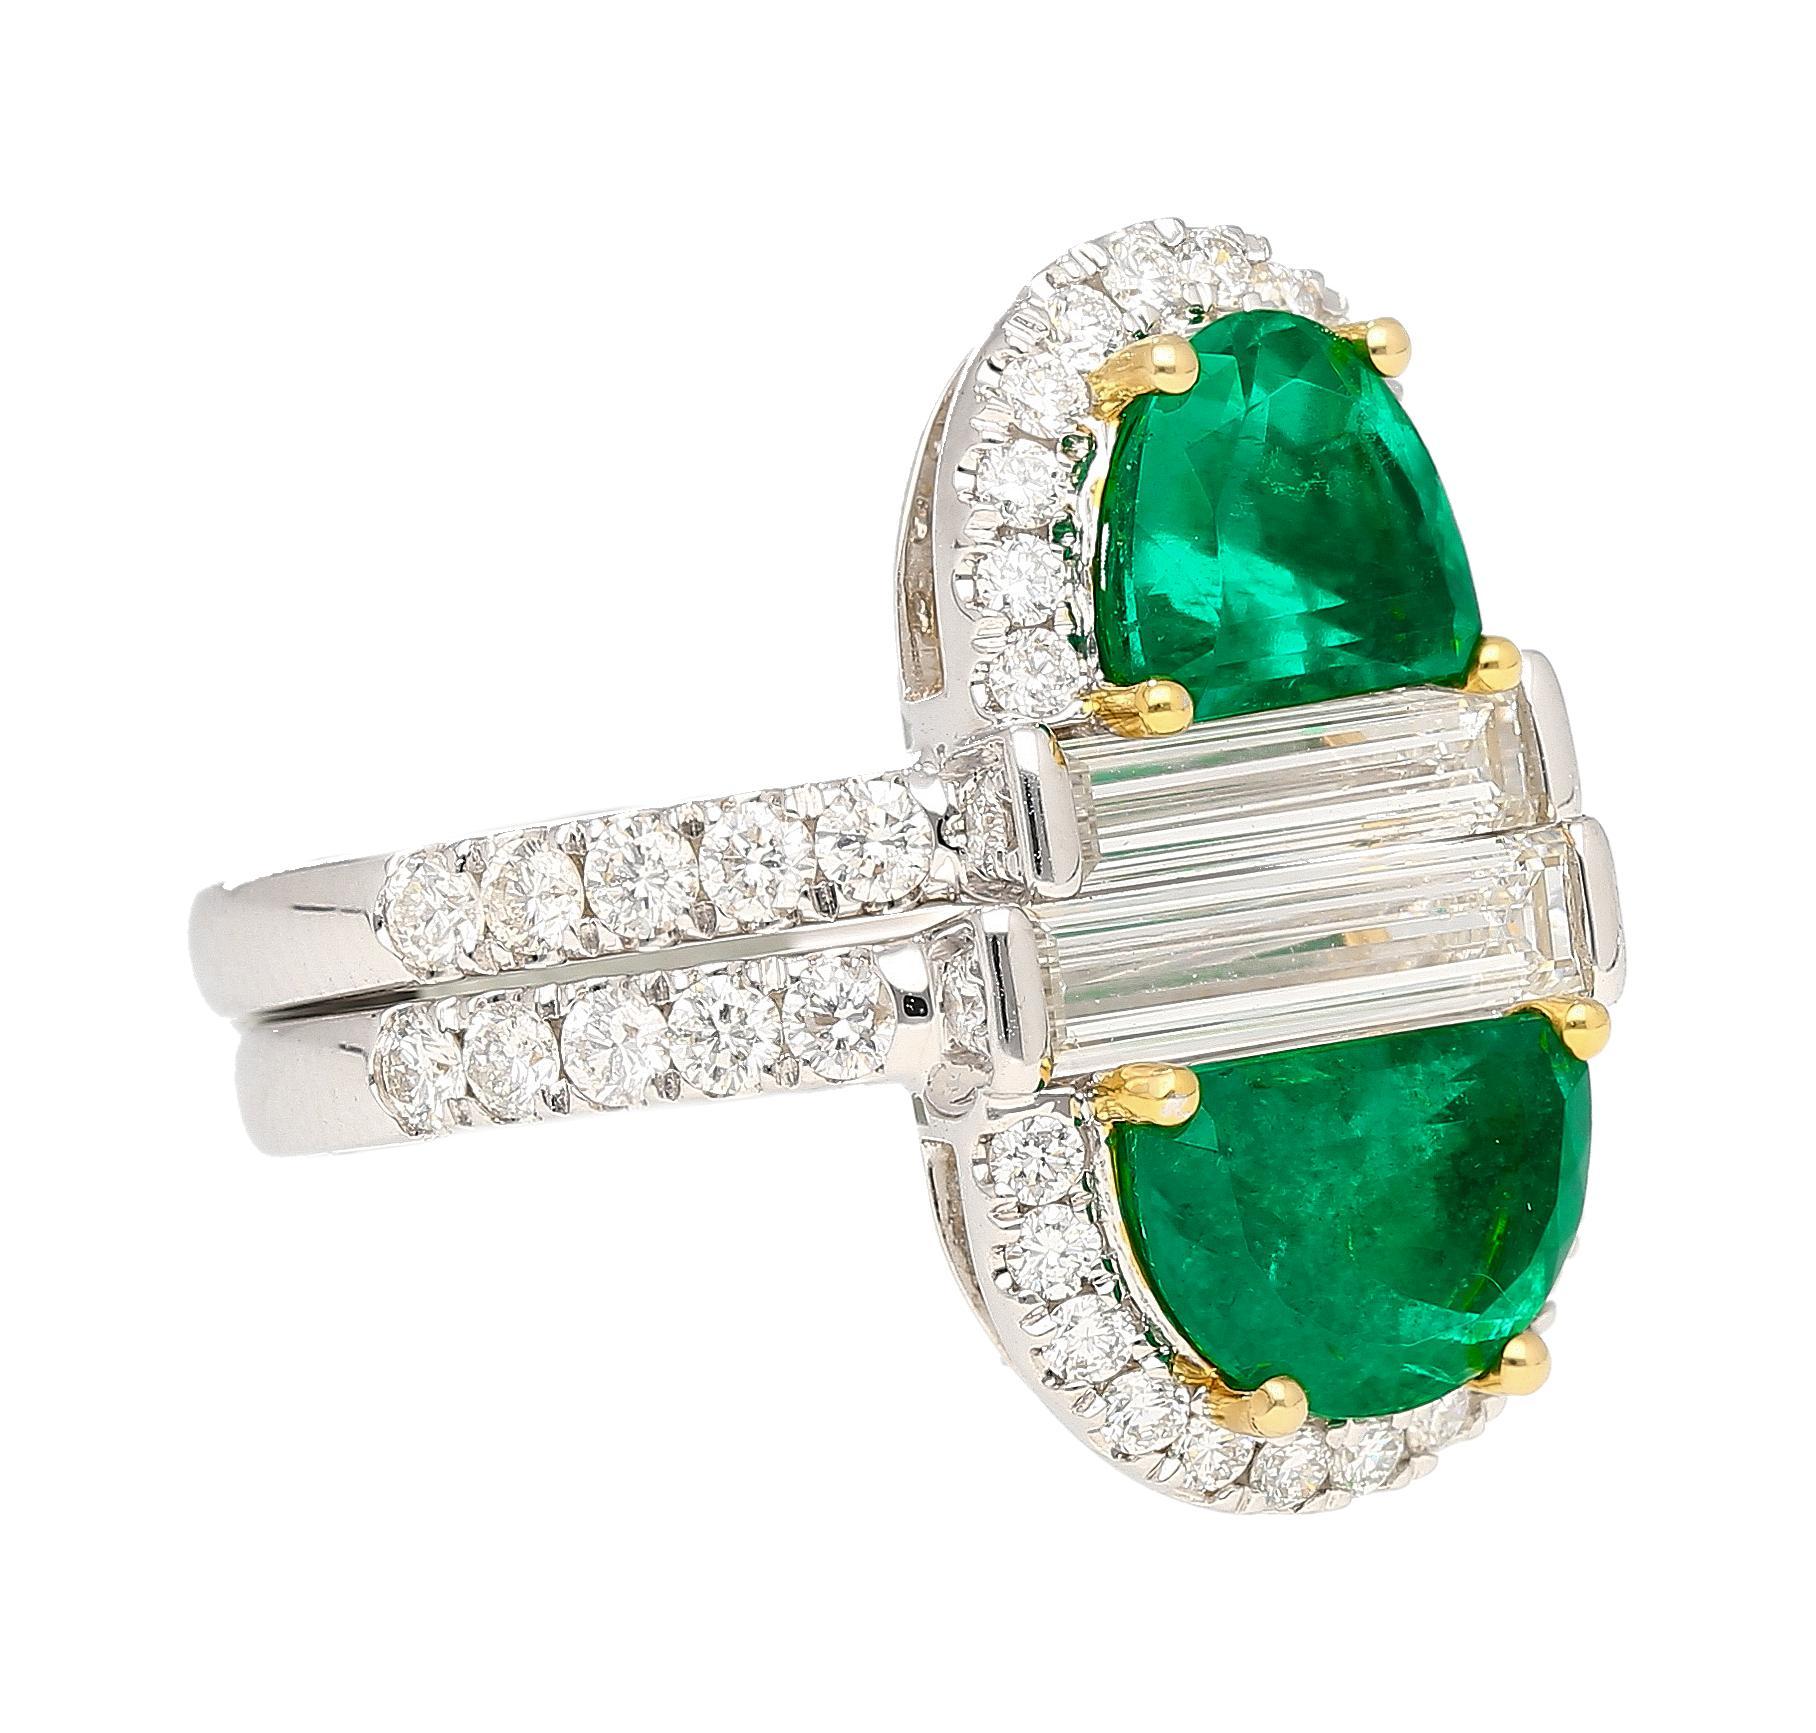 Presenting a Colombian emerald stack ring like none you will ever see again. A stunning marriage of nature's miraculous gifts and human artistry. Set with two half moon cut natural emeralds that stack on top of each other. This ring forms a